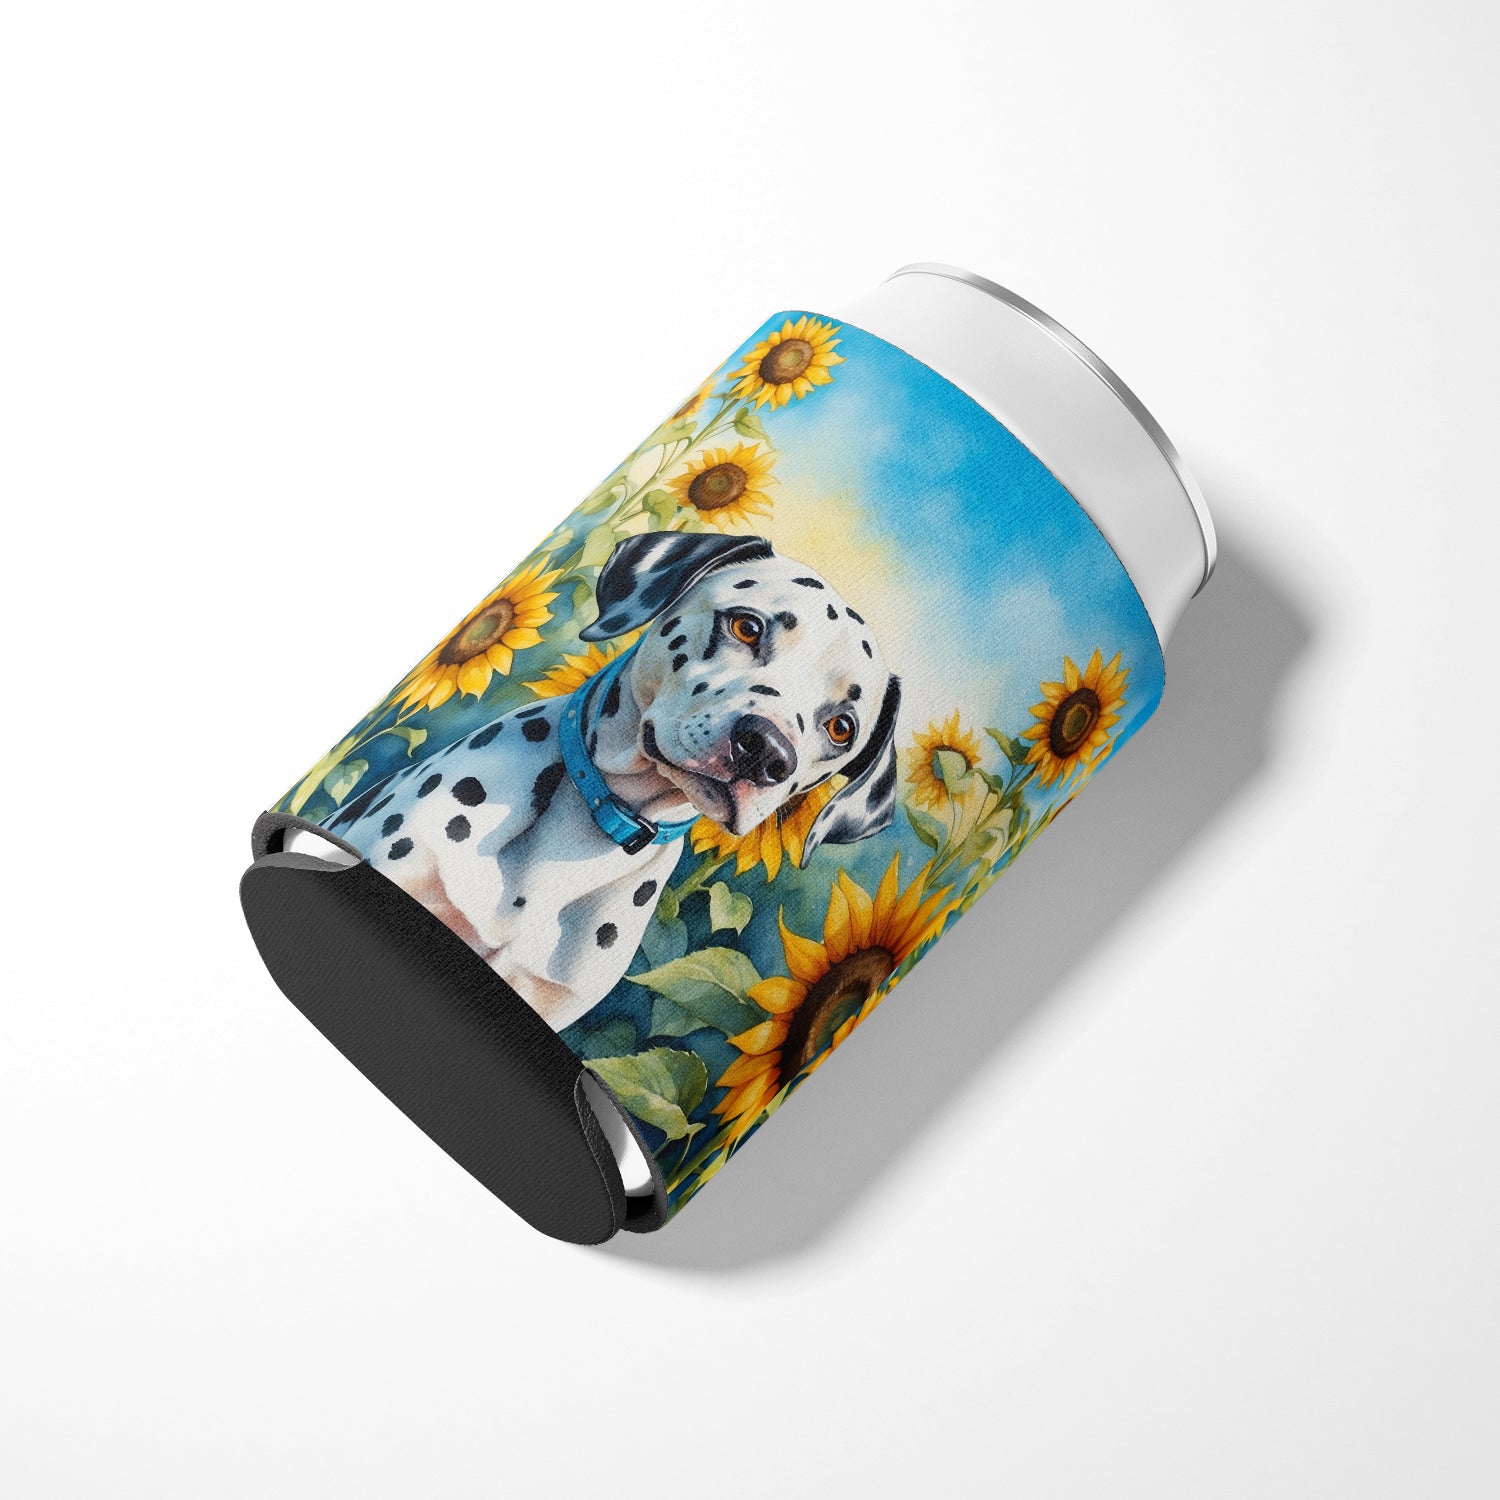 Dalmatian in Sunflowers Can or Bottle Hugger